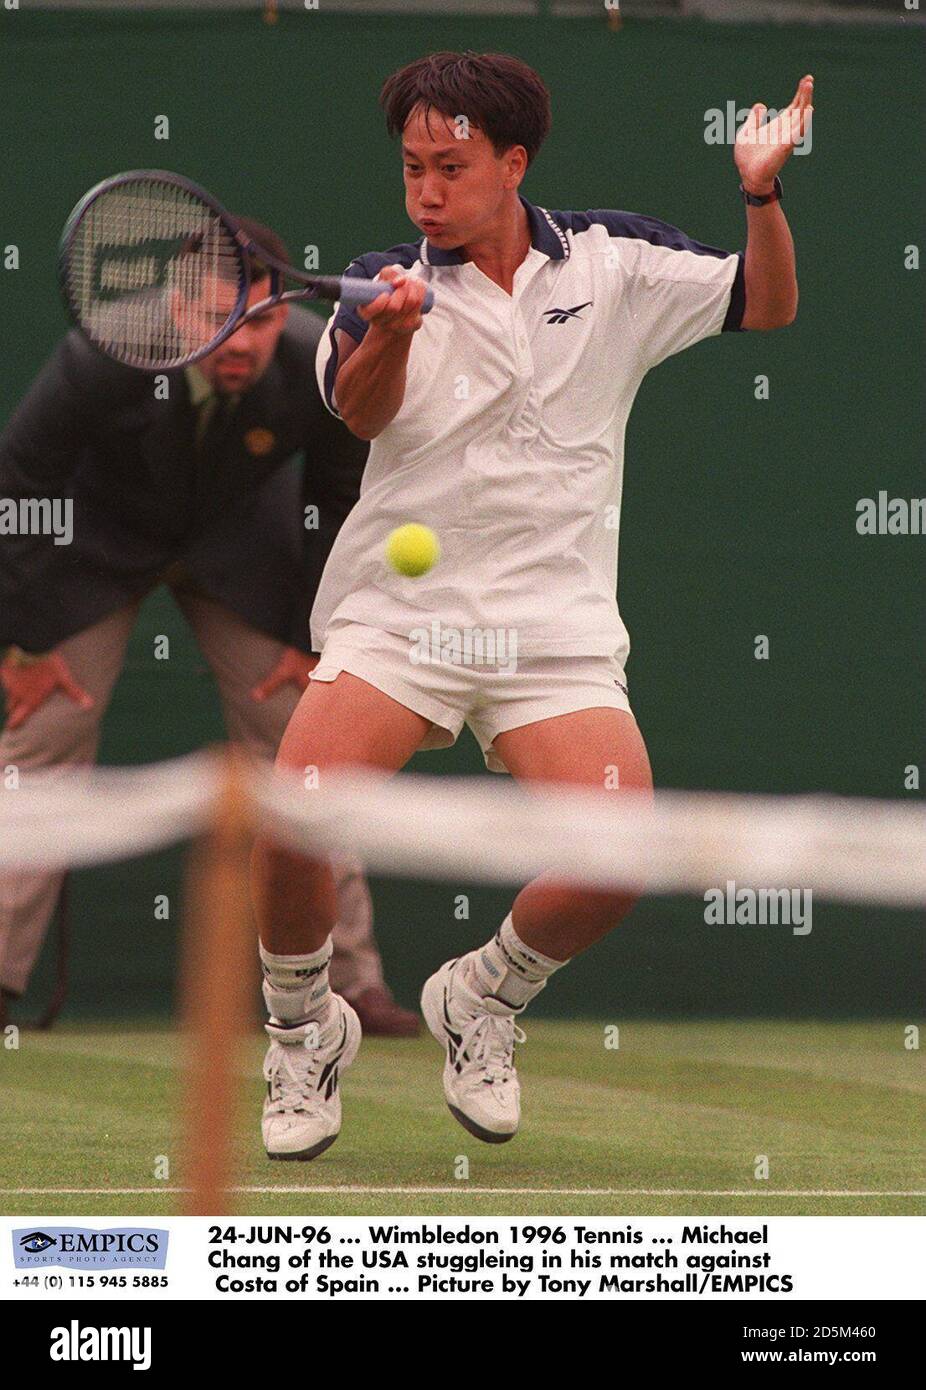 24-JUN-96 ... Wimbledon 1996 Tennis ... Michael Chang of the USA during his First Round defeat in his match against Alberto Costa of Spain ... Picture by Tony Marshall/EMPICS Stock Photo